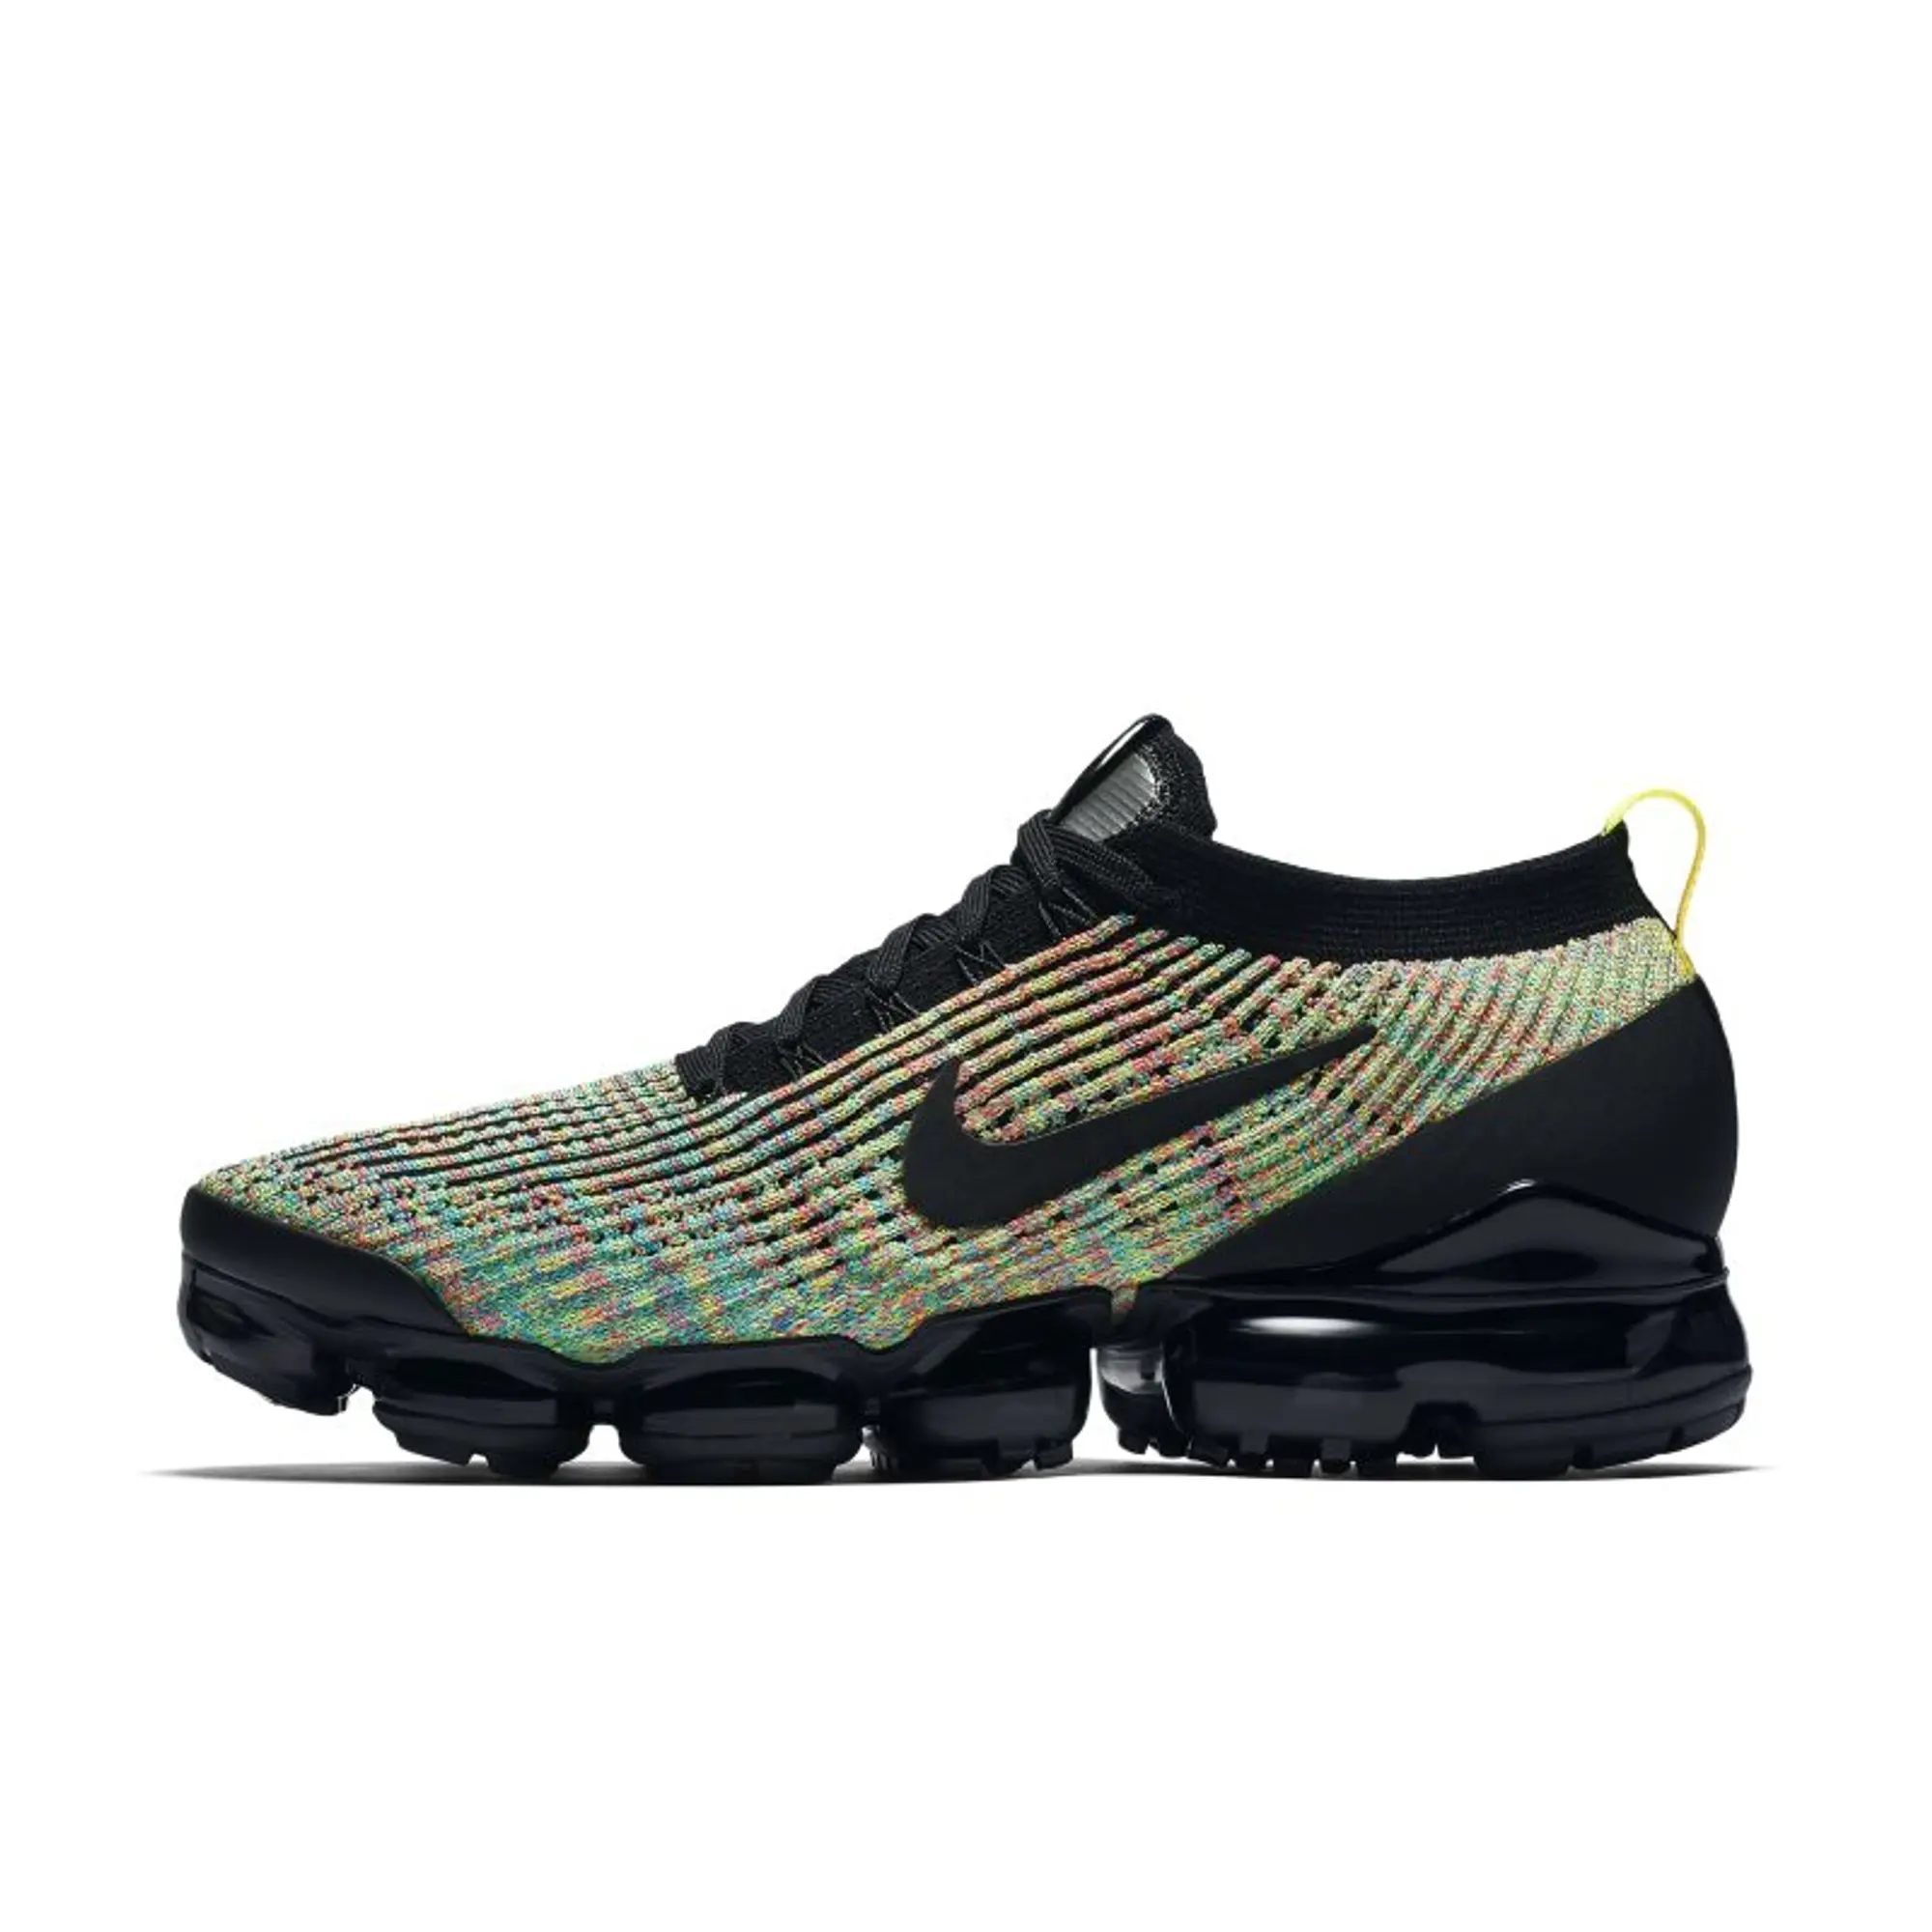 Nike Air Vapormax Flyknit 3 Multi-Color Shoes